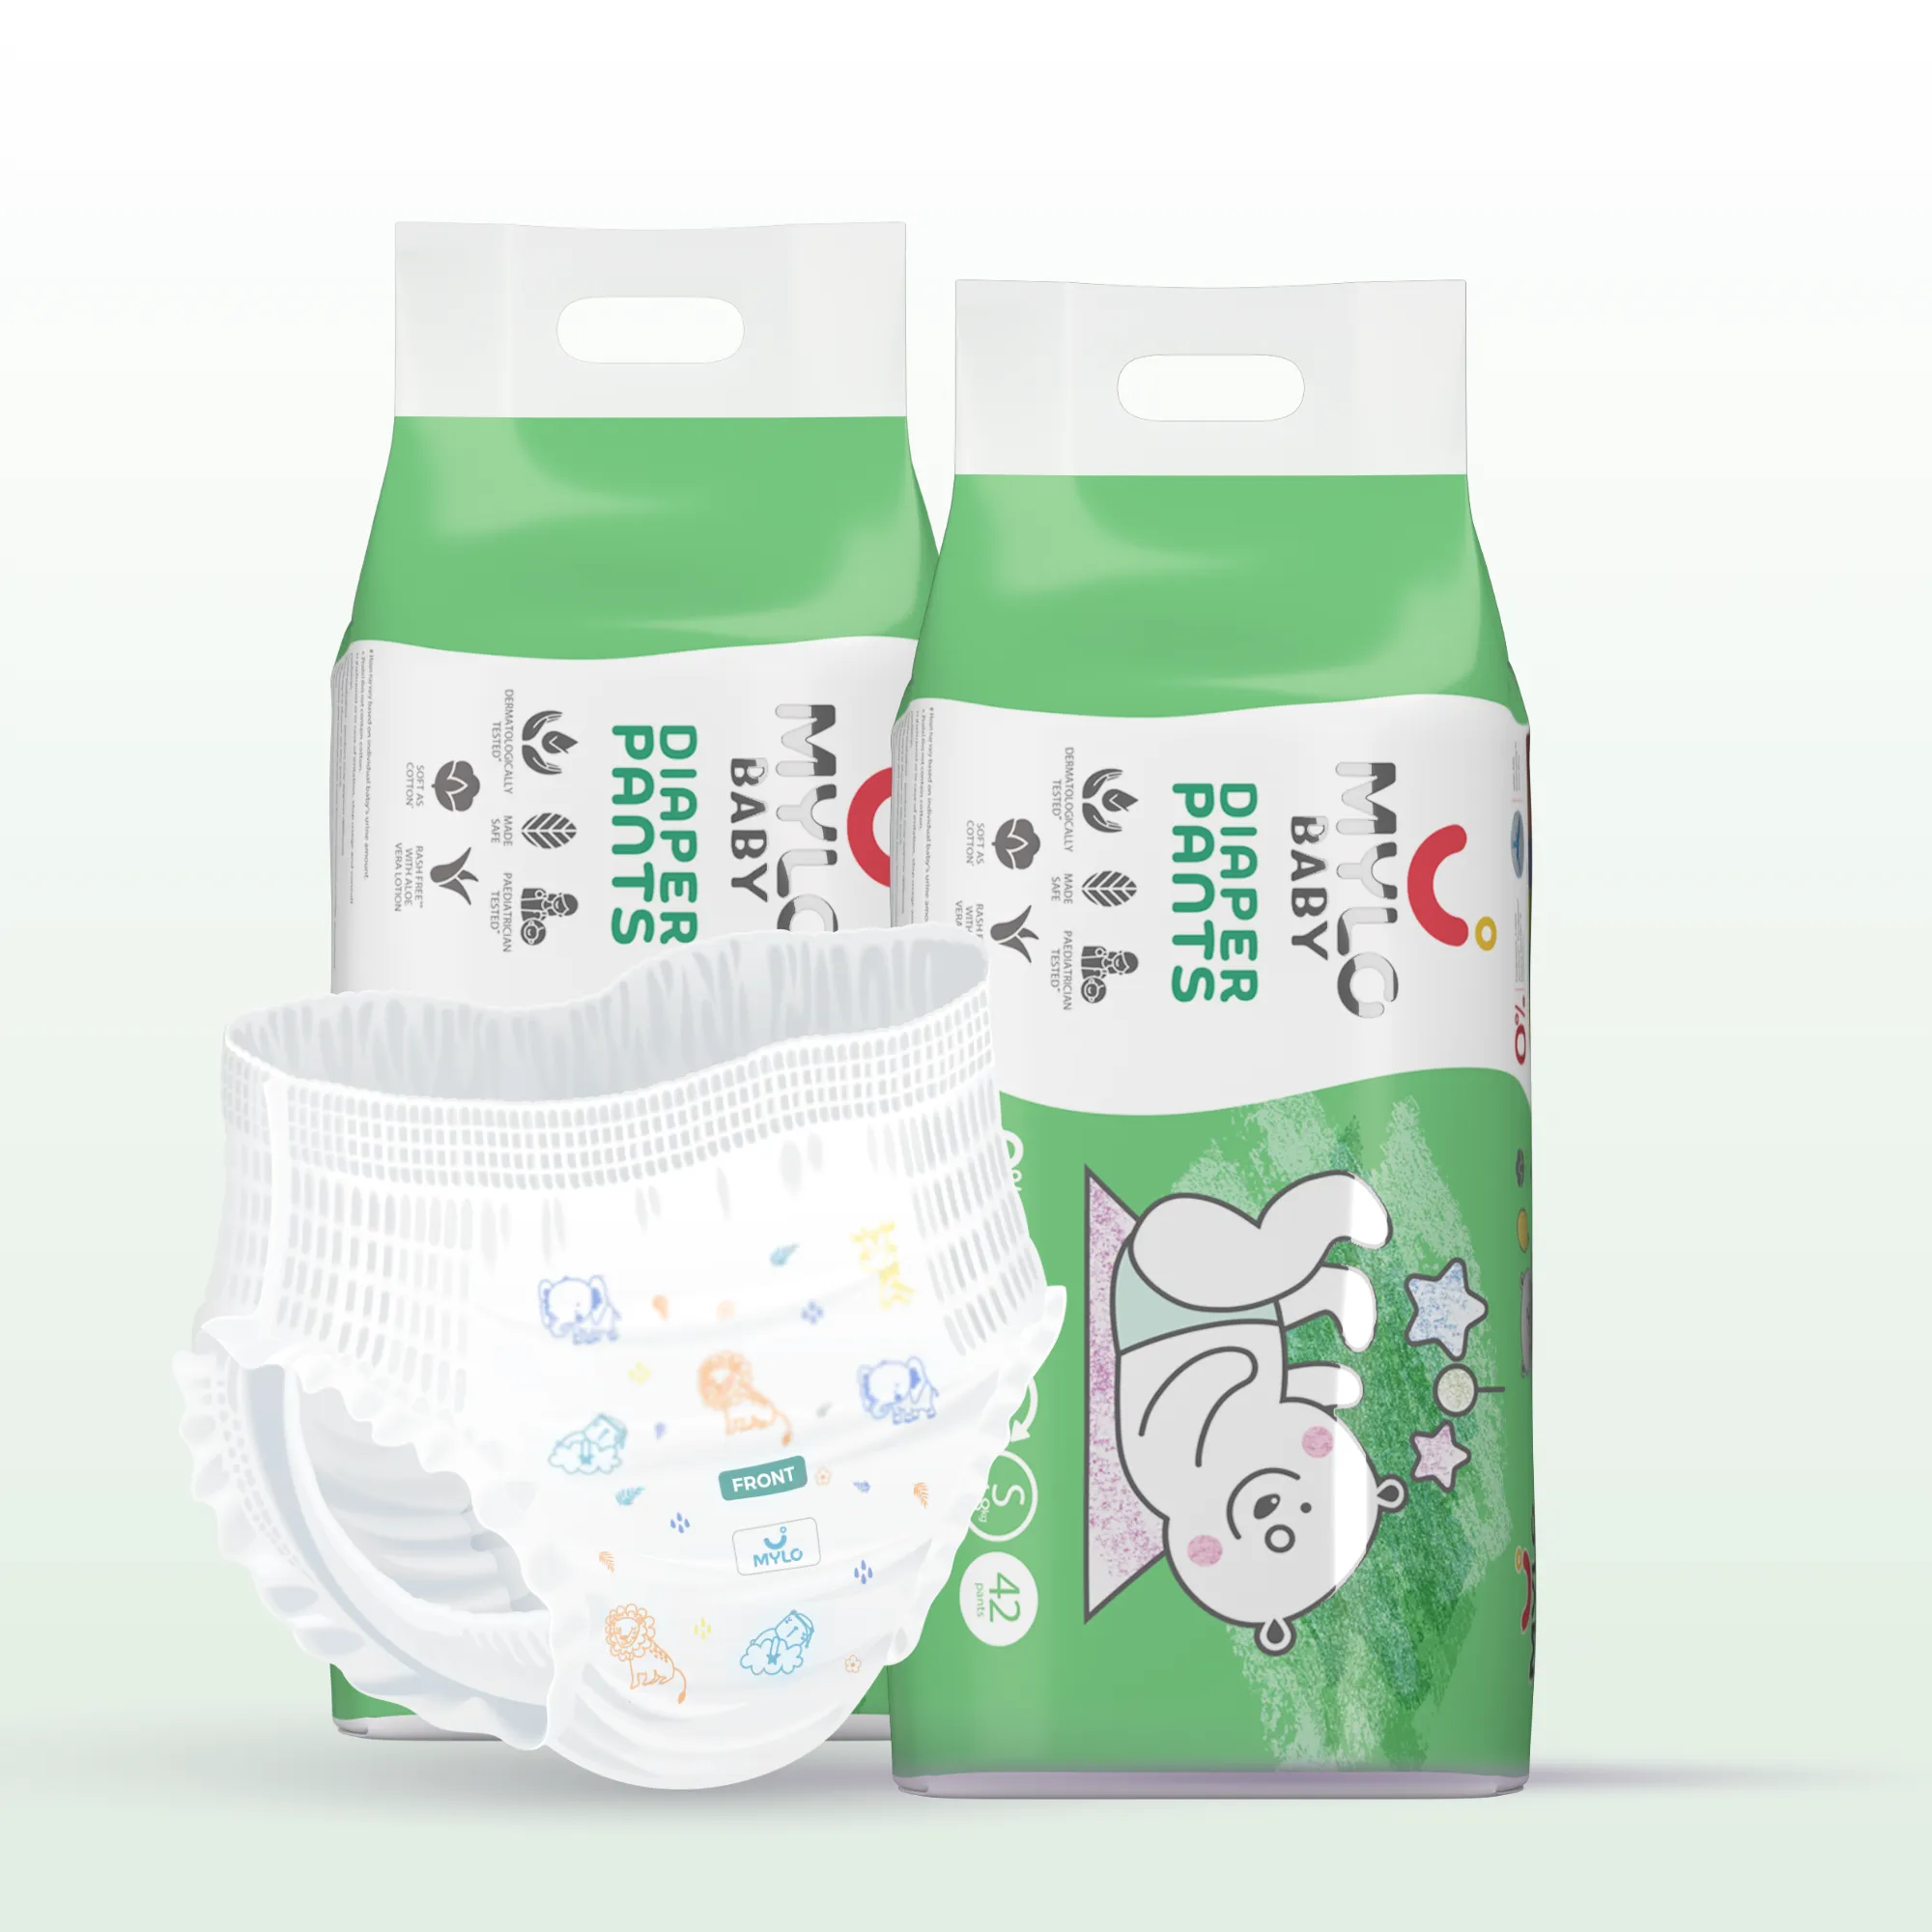 Apollo Life Baby Diaper Pants Medium, 40 Count in Ahmedabad at best price  by Classic Medical Supply - Justdial